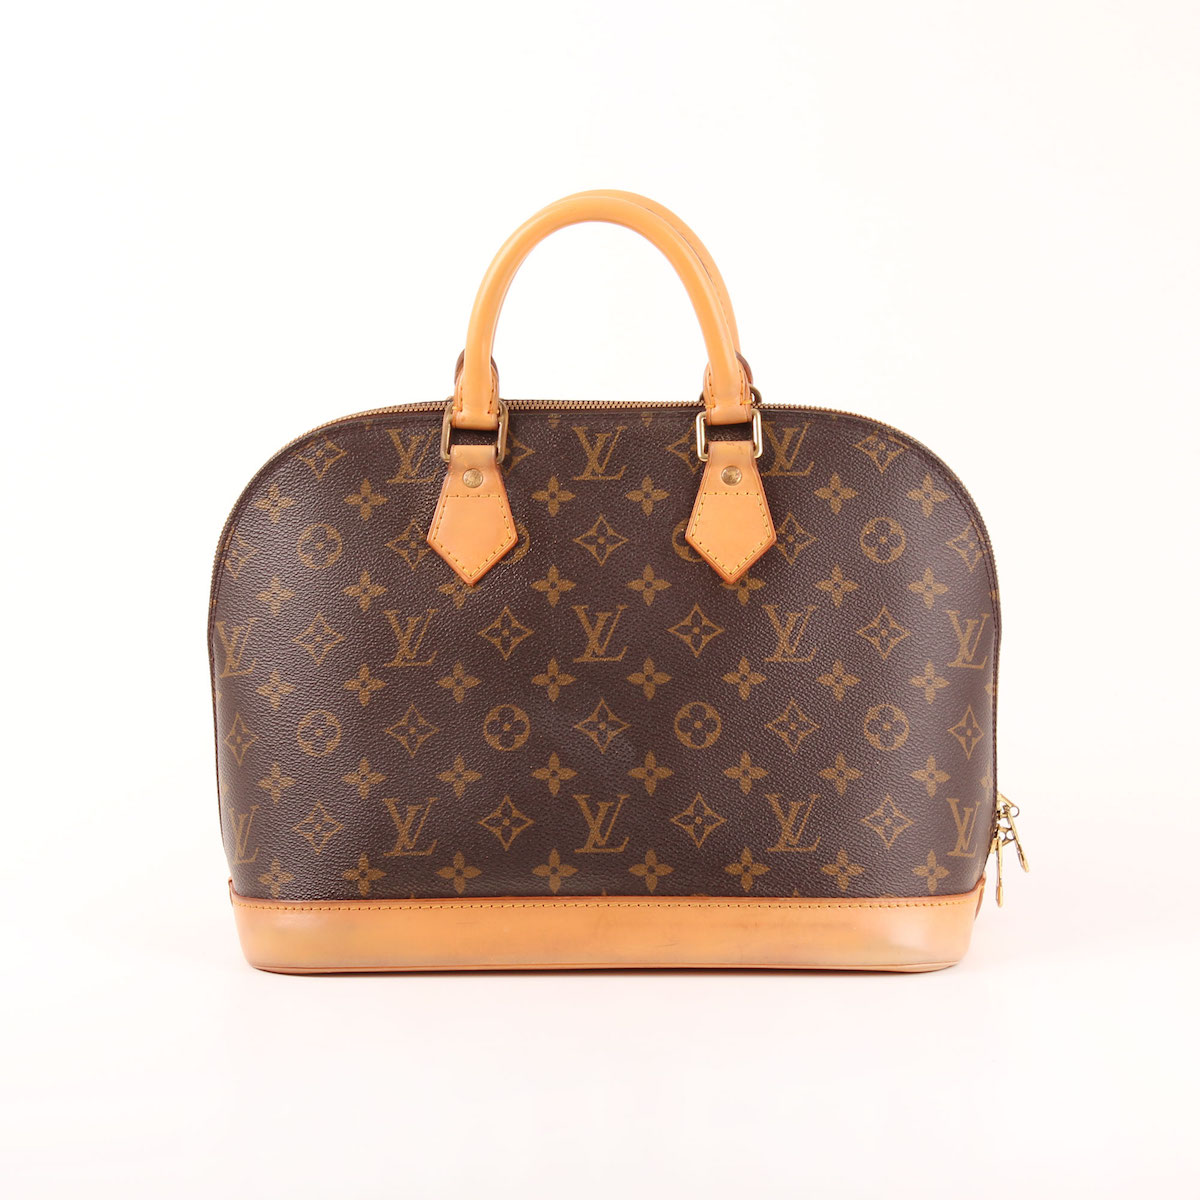 W for WOW: Louis Vuitton's new it bag, the W bag, hits the Design District